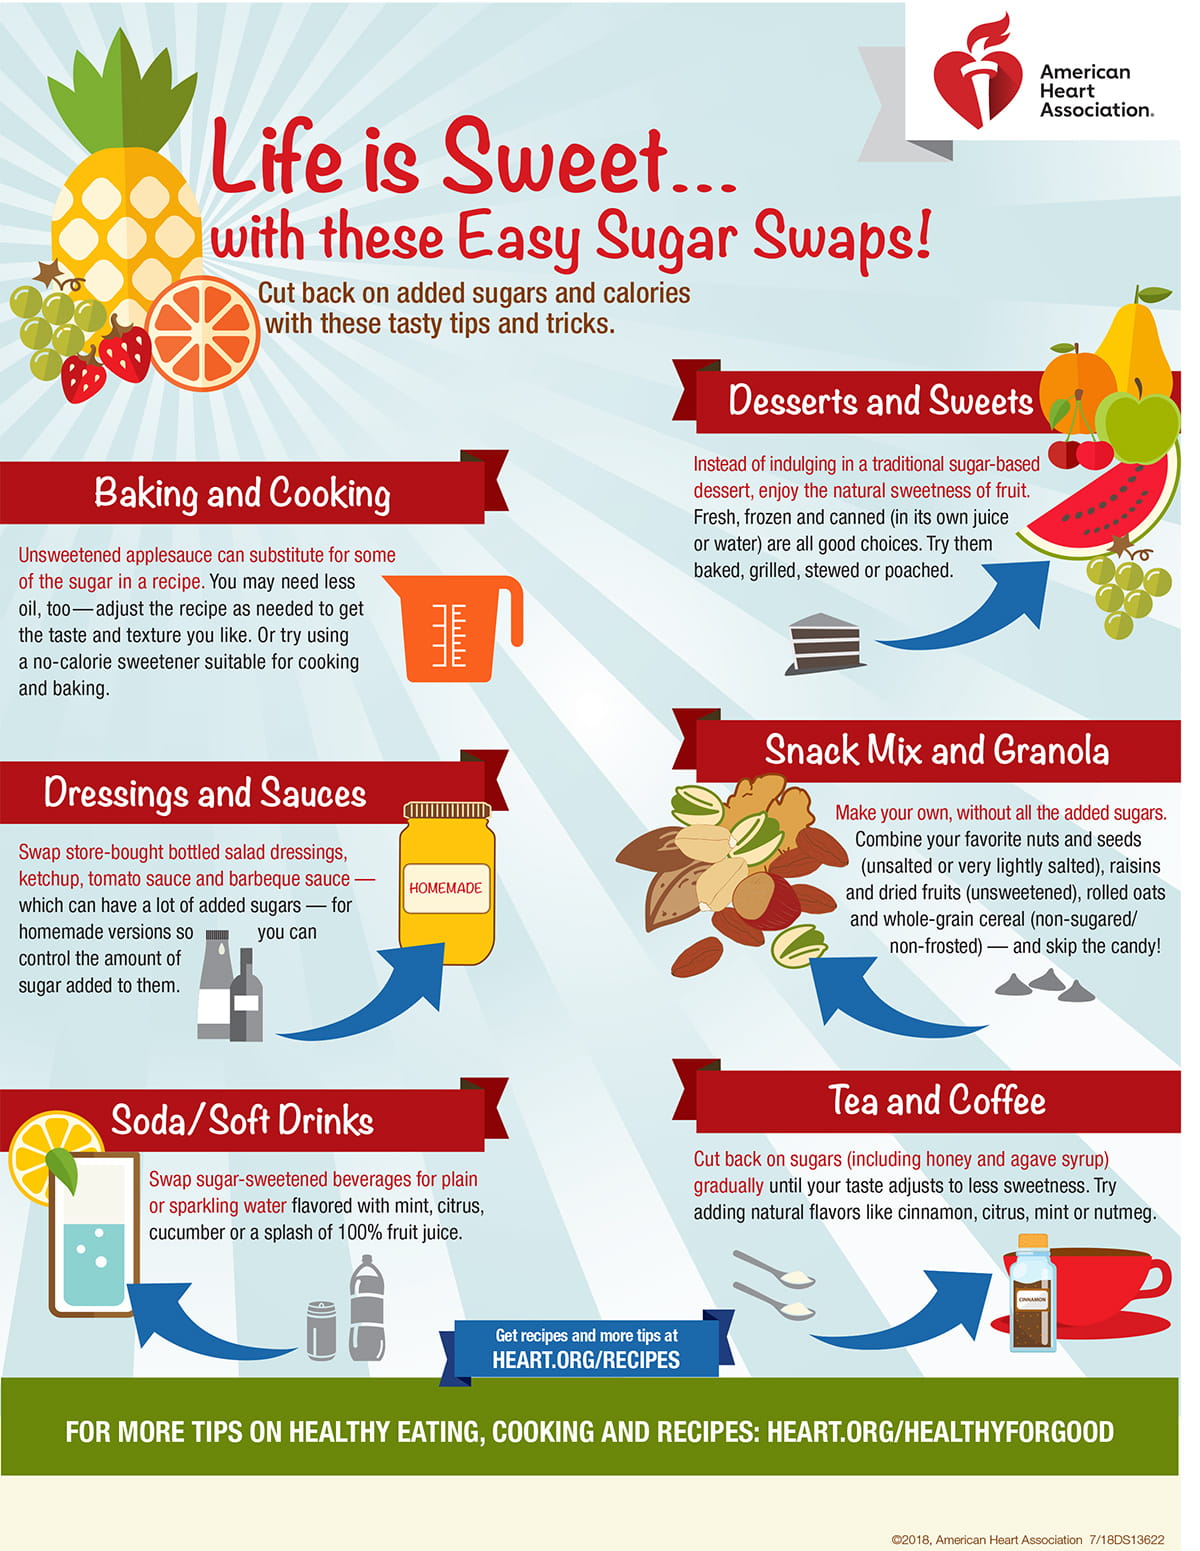 https://www.heart.org/-/media/AHA/Recipe/Infographics-Images/Life_is_Sweet_Infographic.jpg